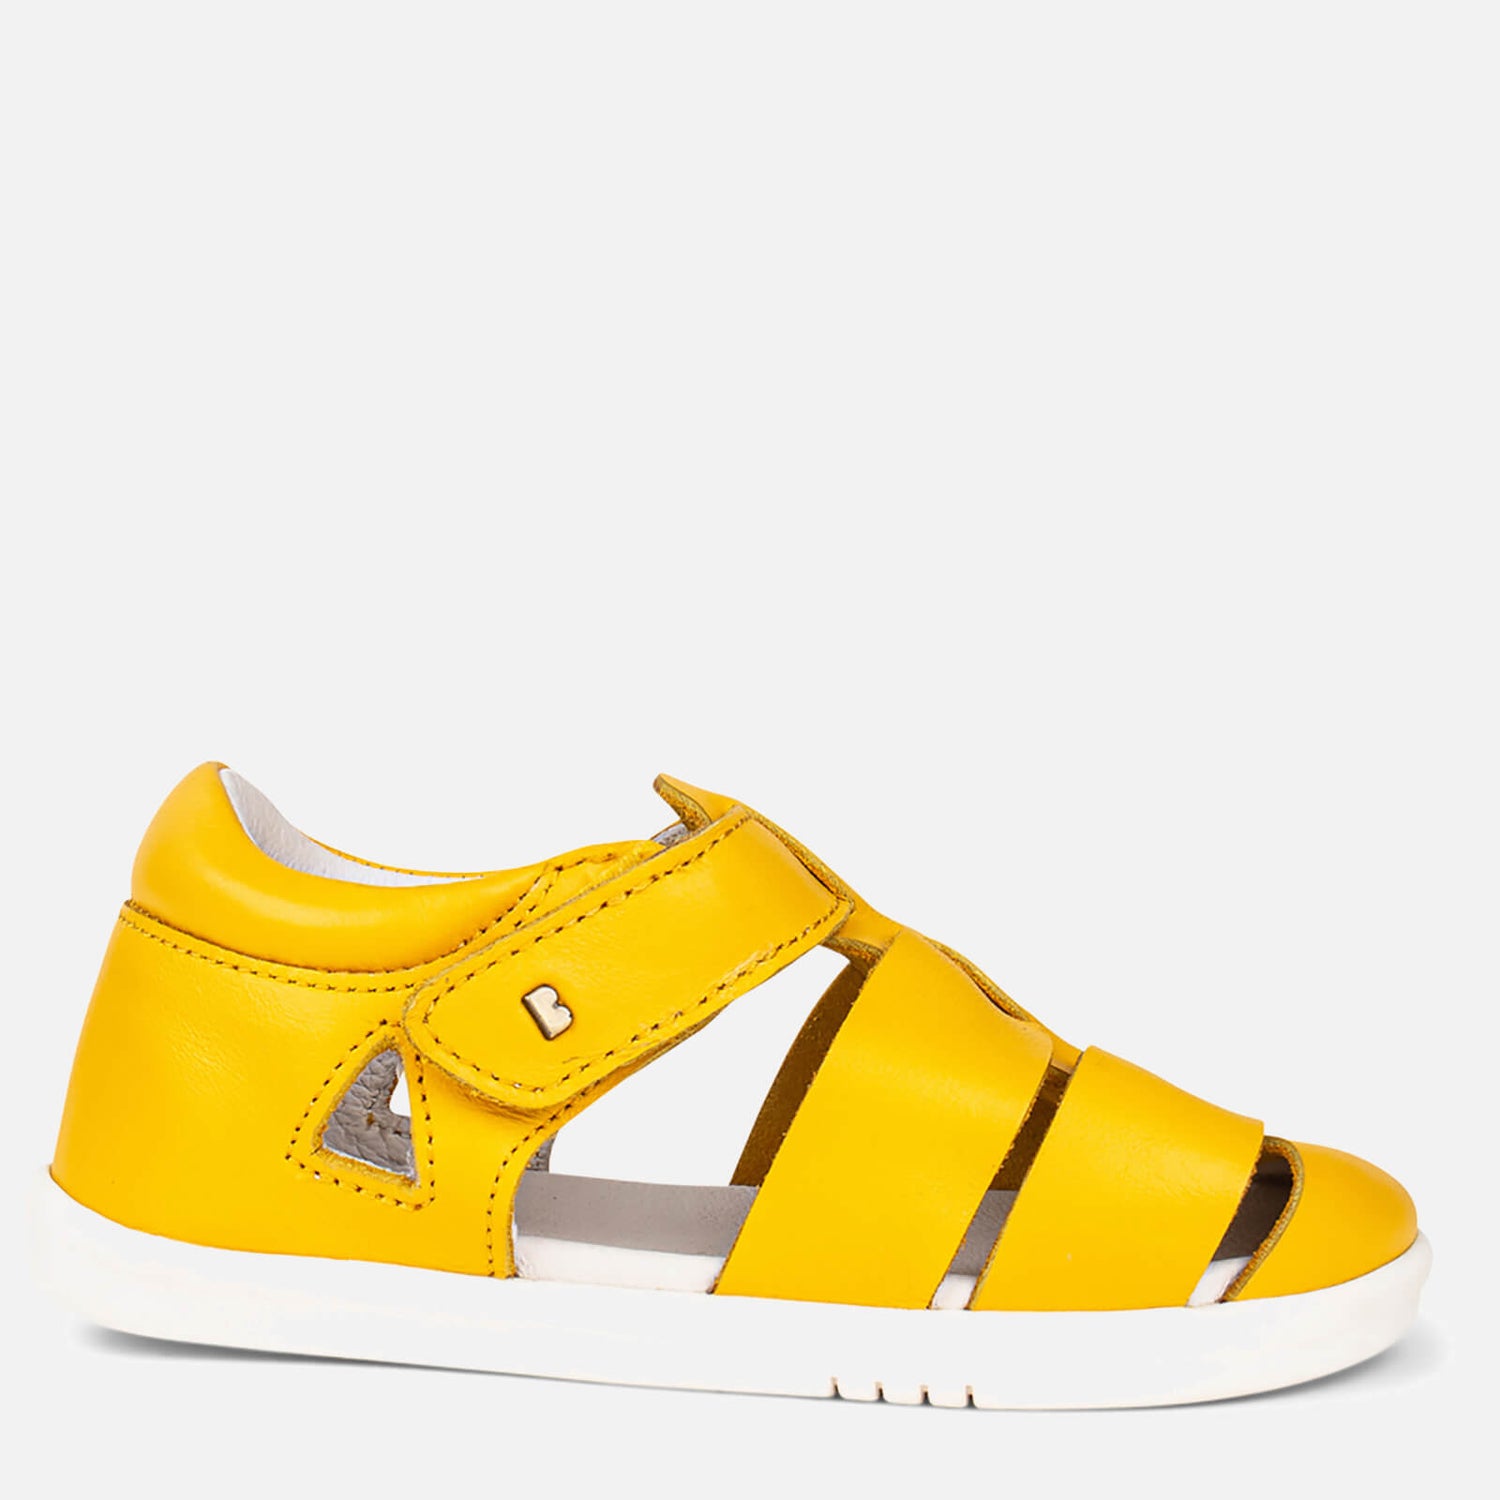 Bobux Toddlers' Step Up Tidal Sandals - Yellow